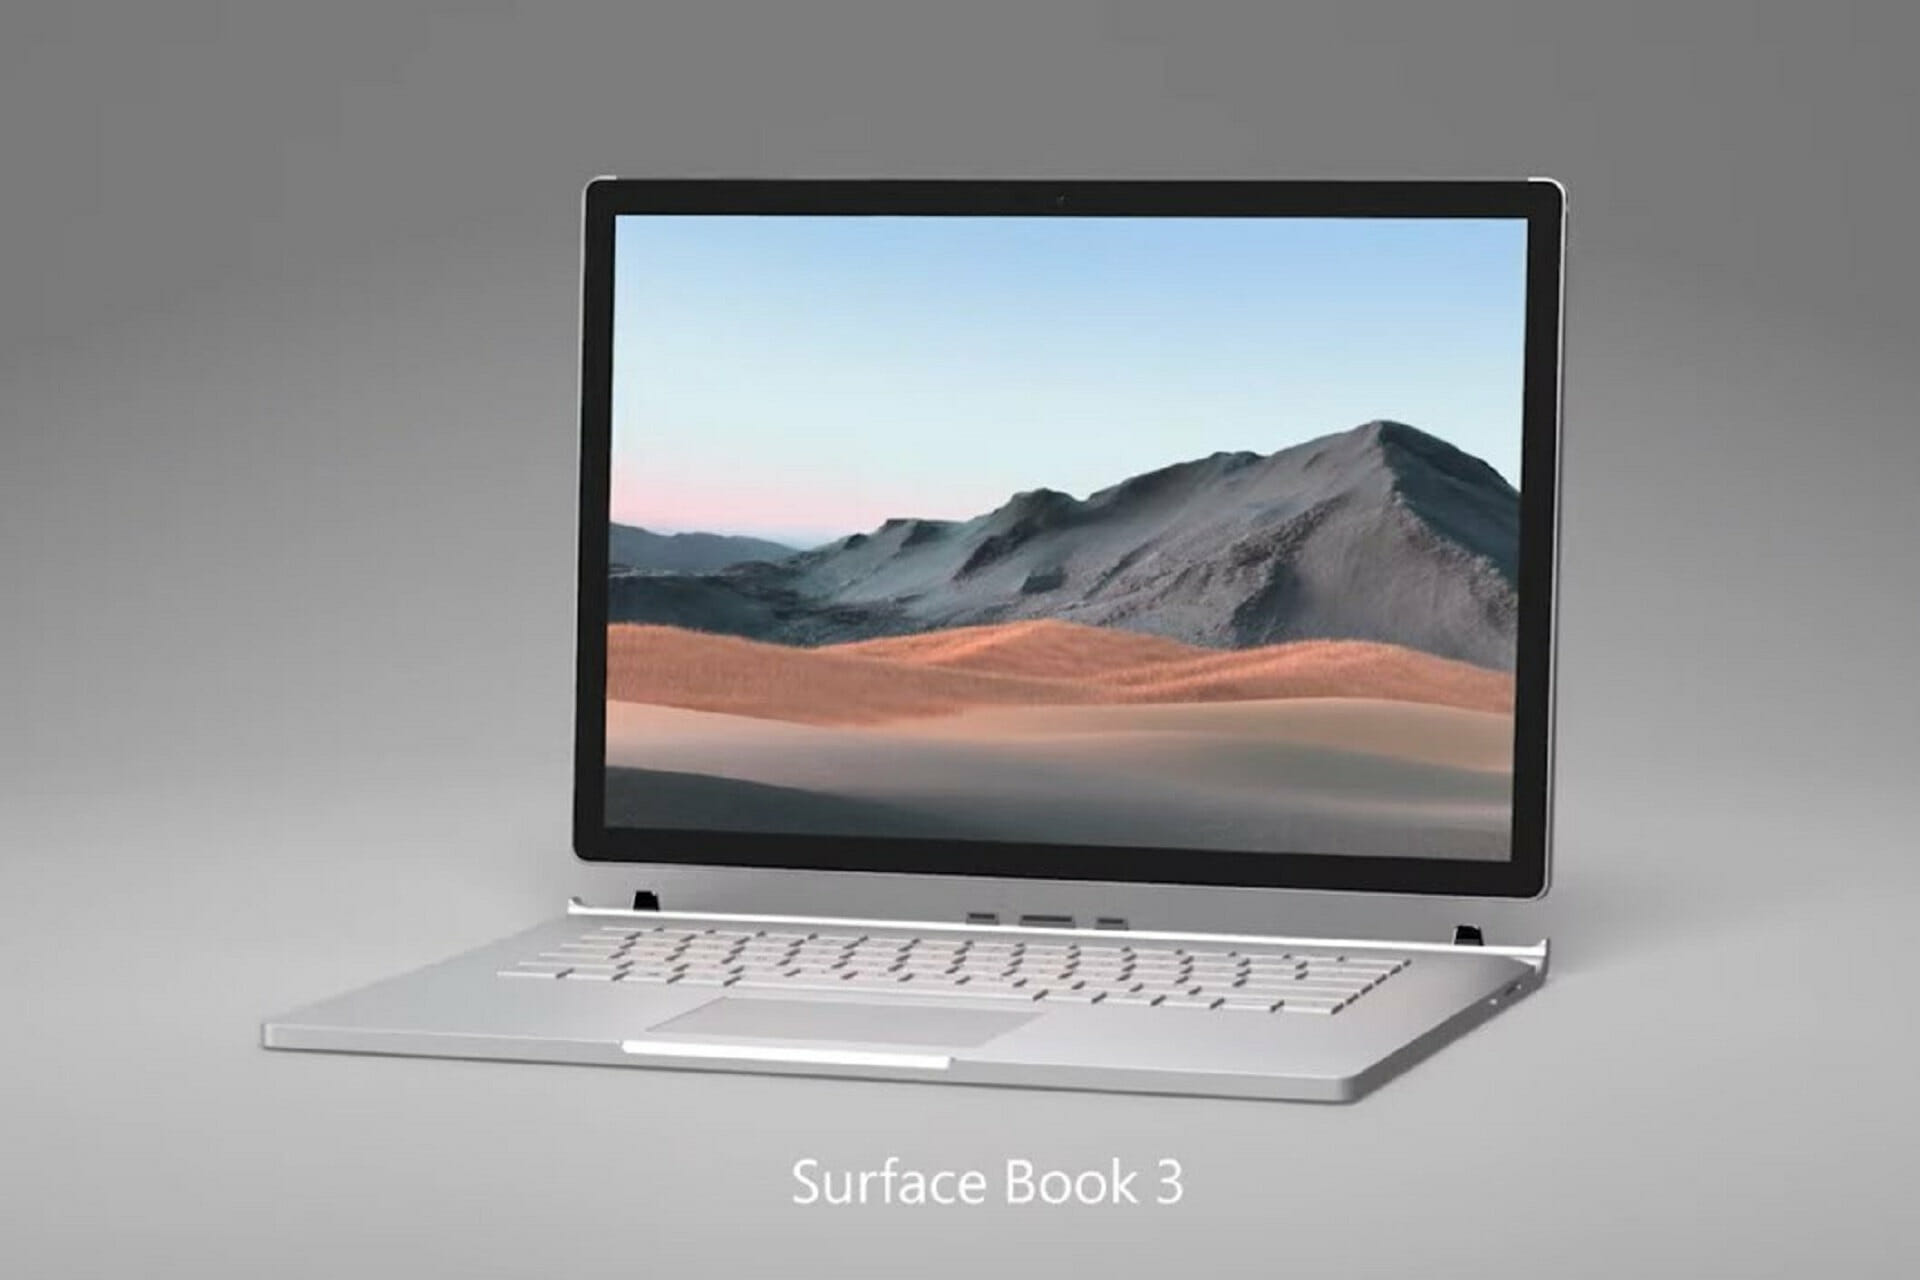 Microsoft Surface Book 3 Black Friday deals